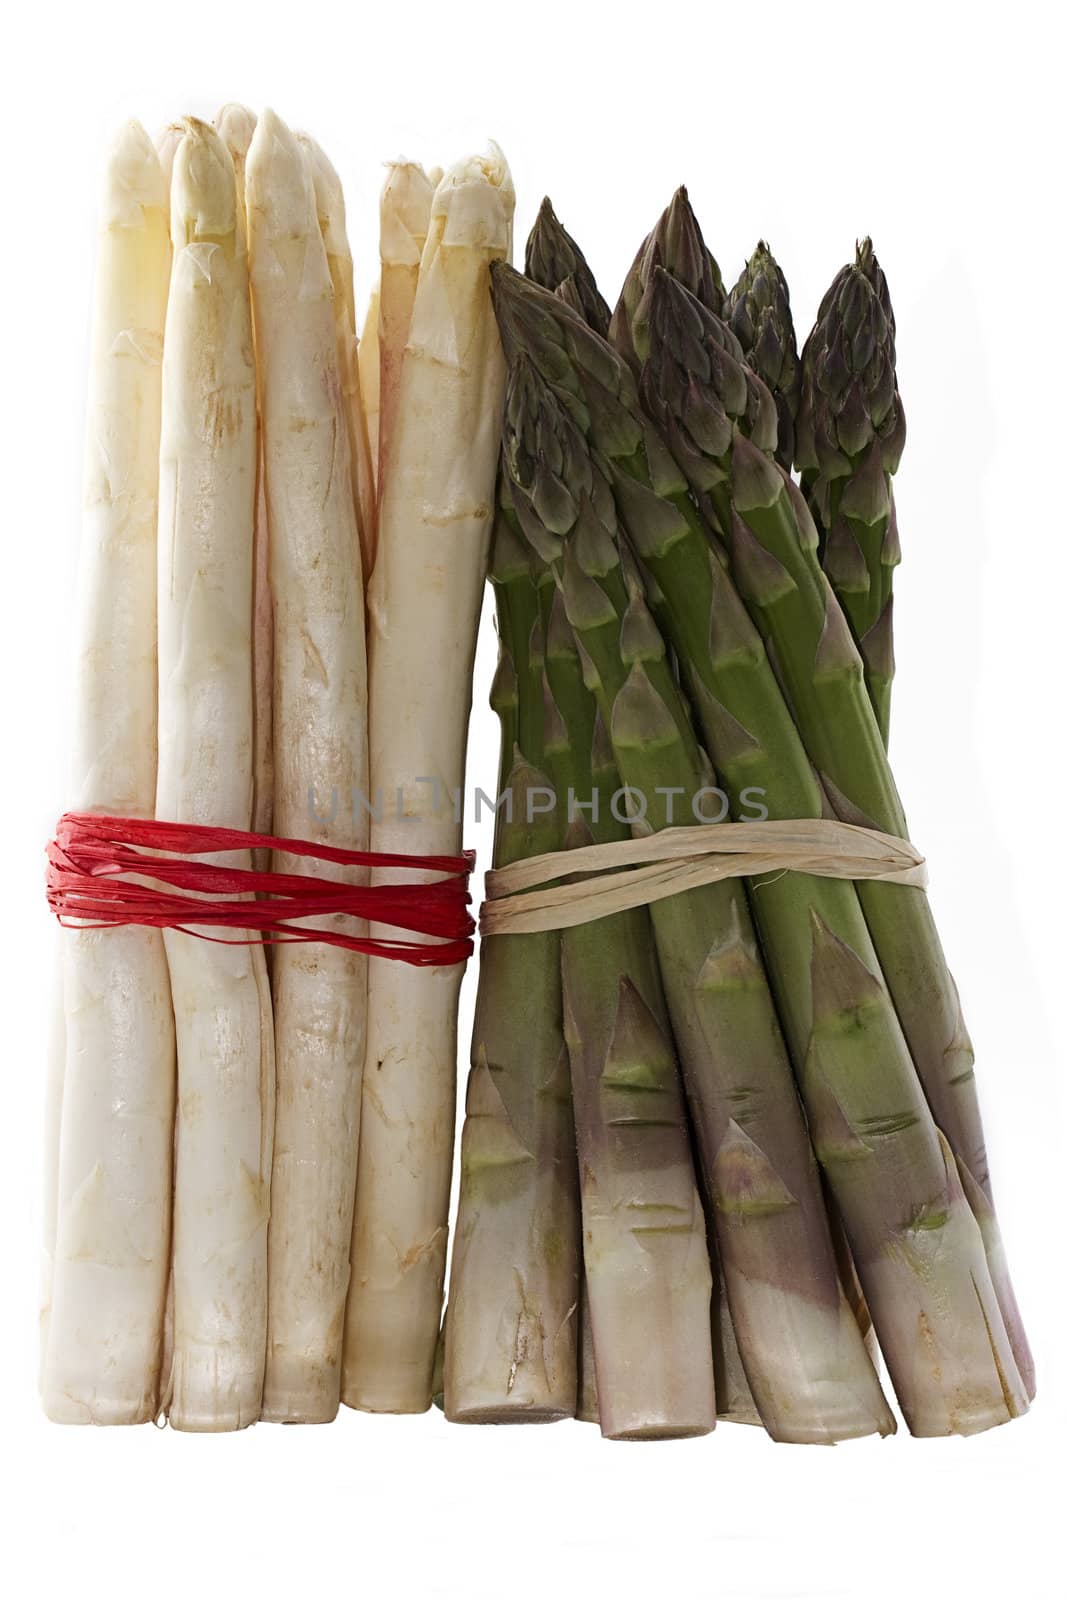 a bundle of green and a bundle of white asparagus  isolated on white background